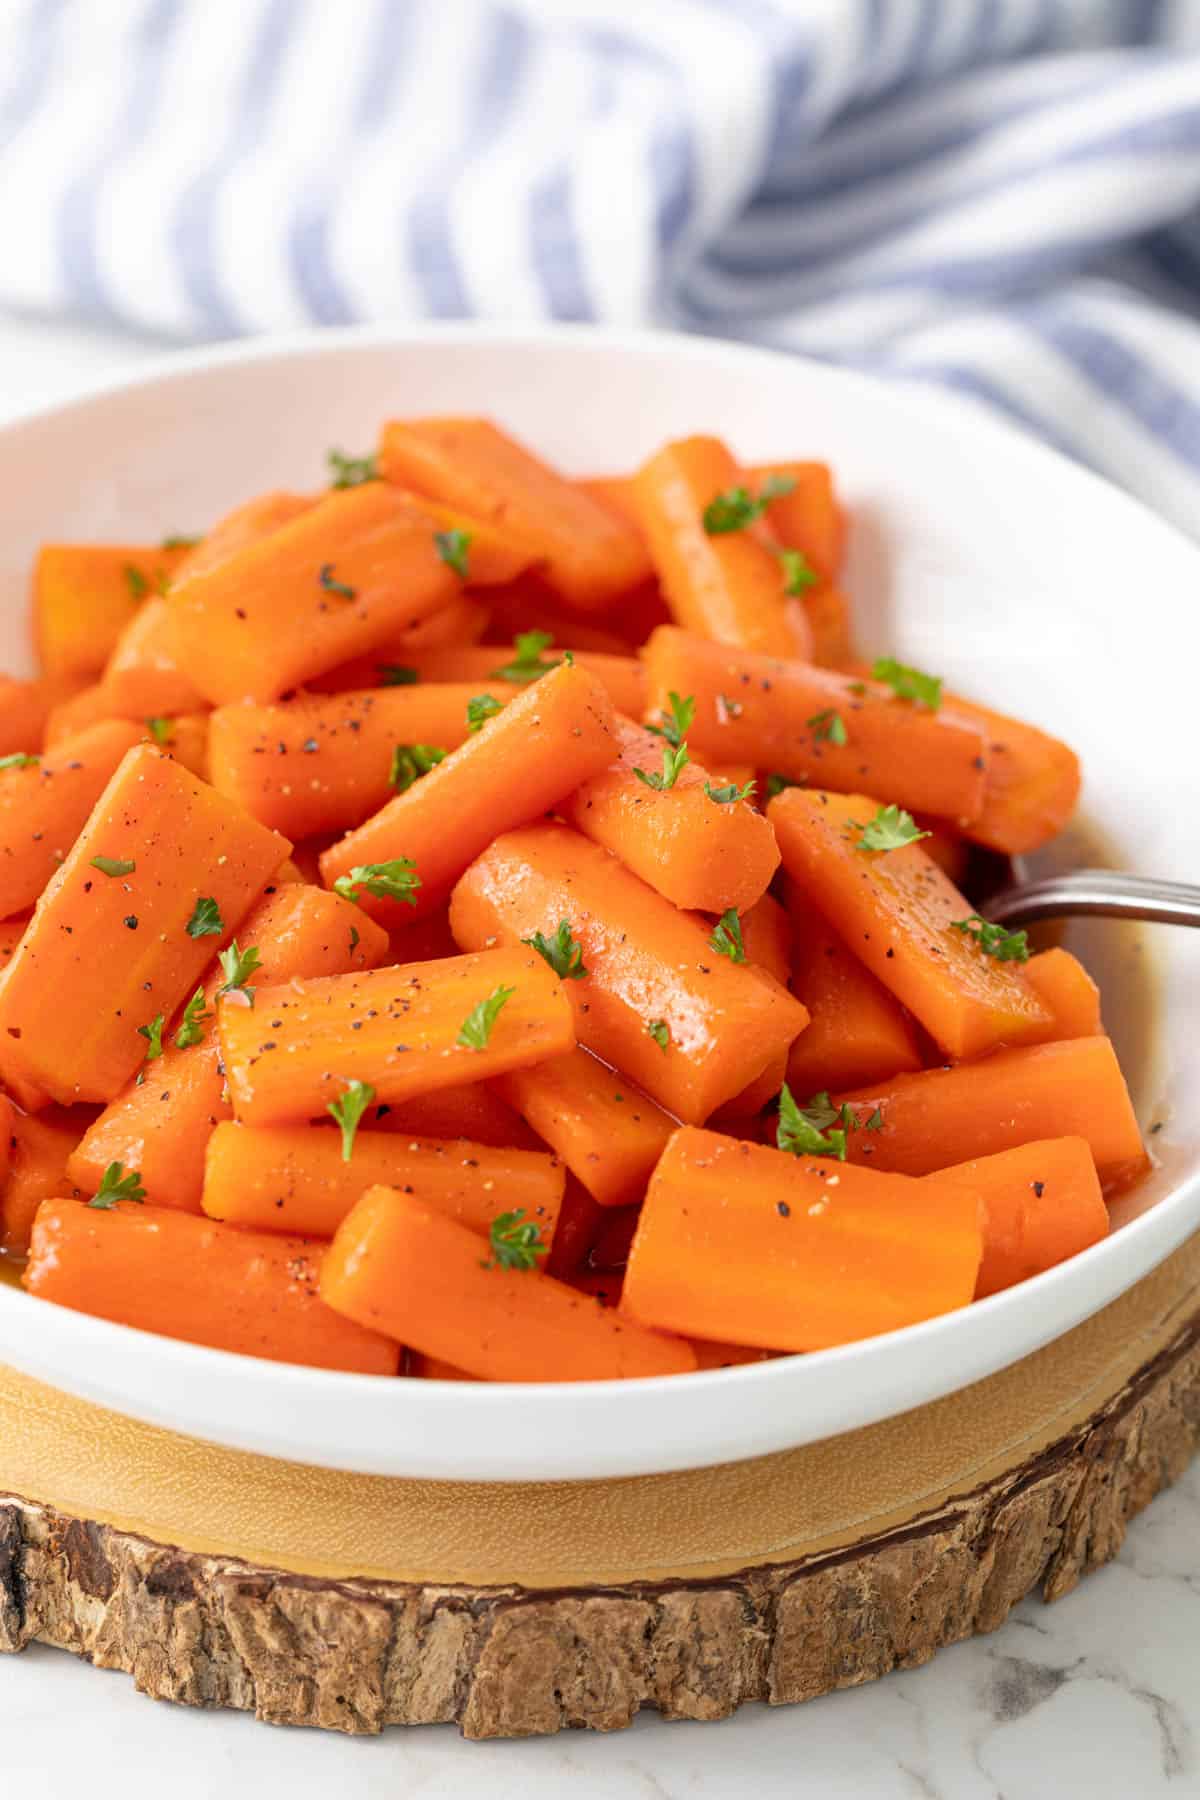 Glazed carrots in a white bowl with a serving spoon.